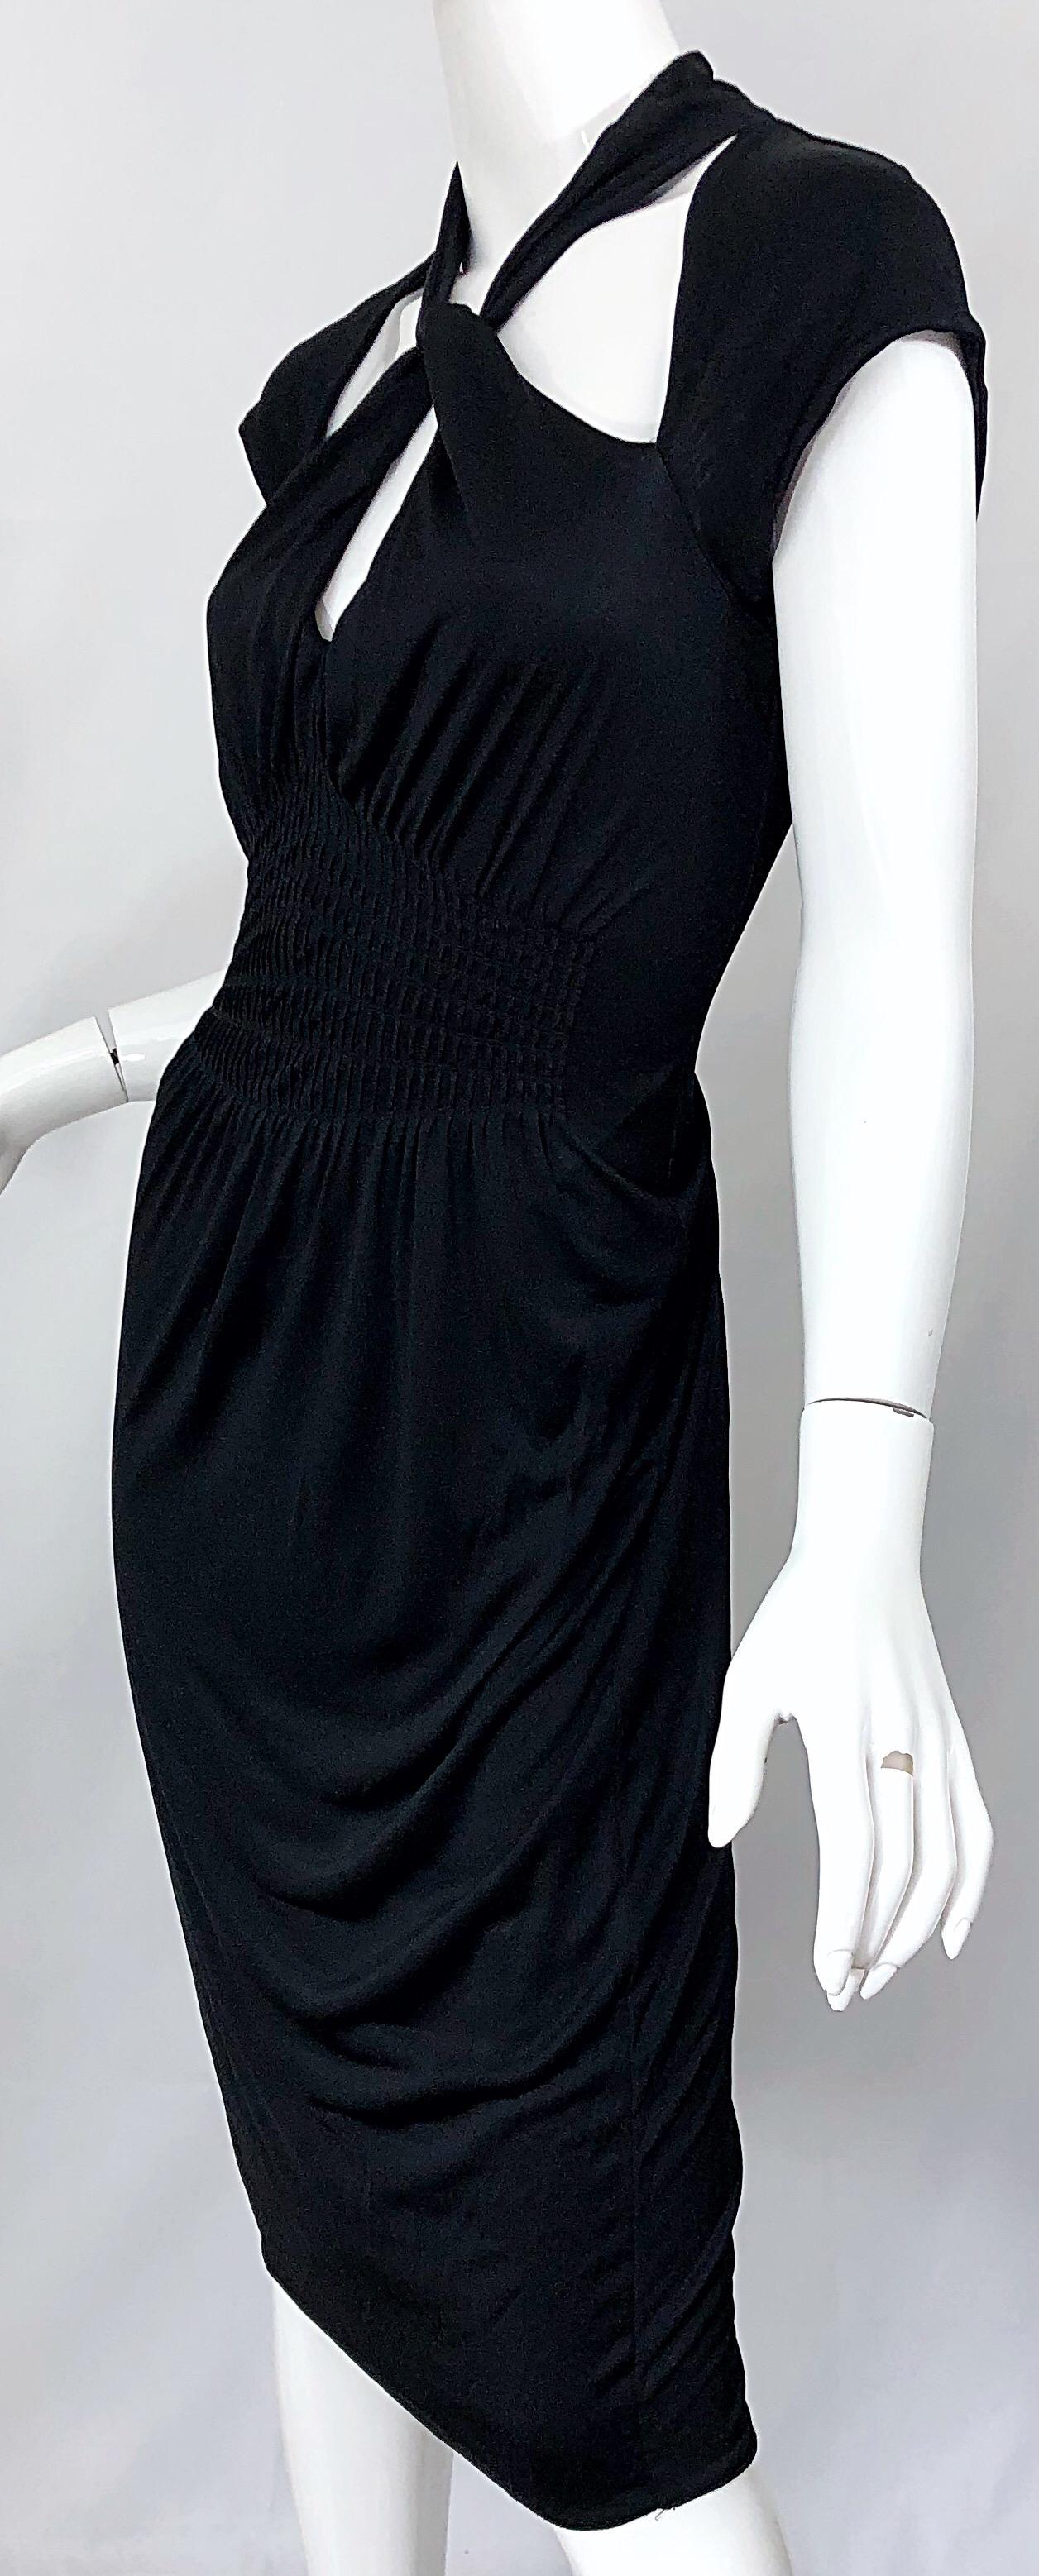 Gucci Tom Ford Fall 2003 Runway Black Cut Out Backless Stretch Jersey Dress  6